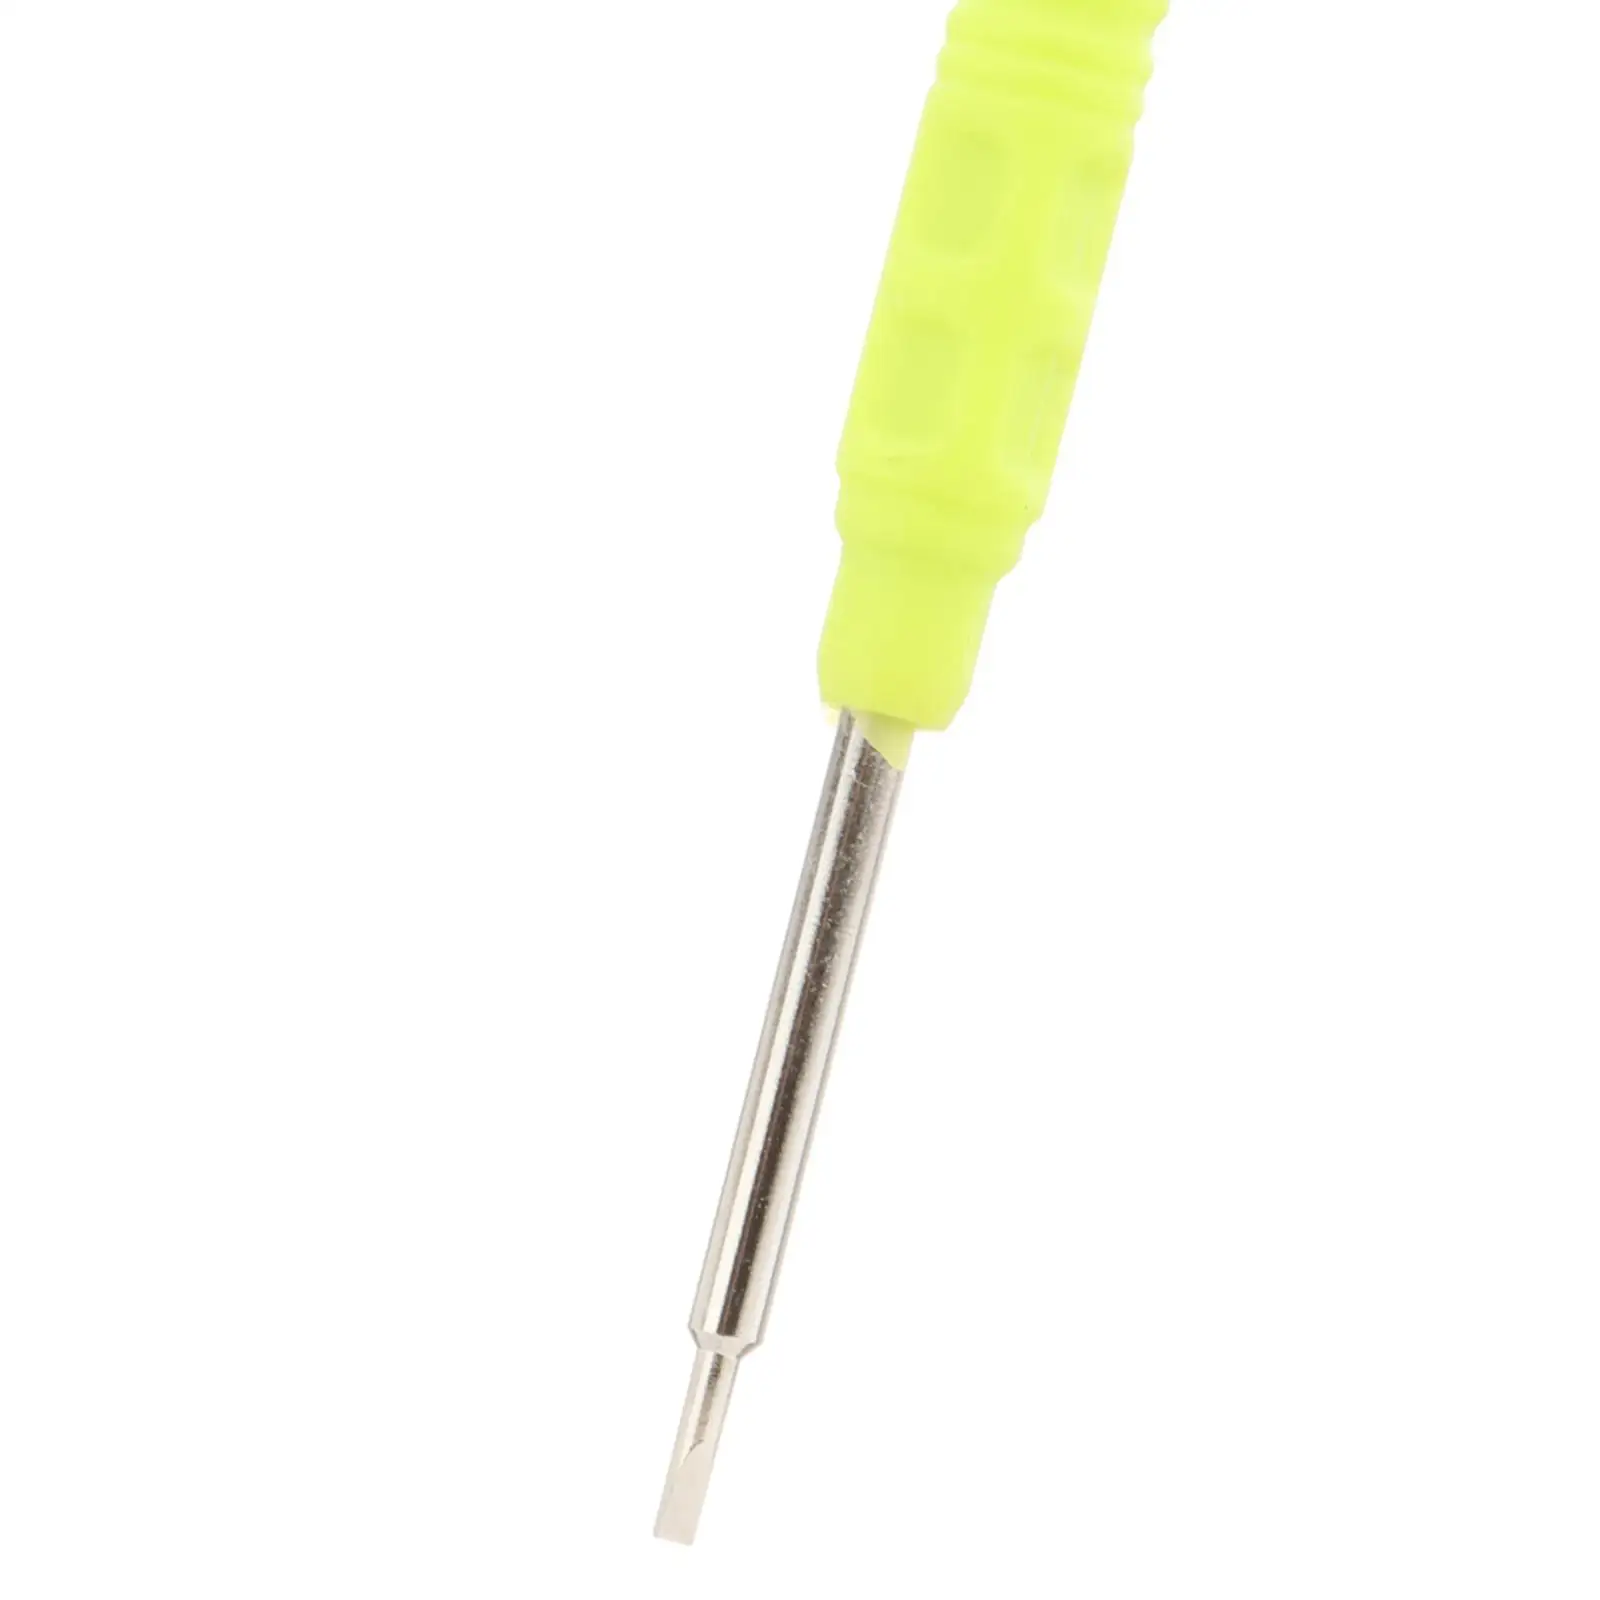 Epee Fencing Screwdriver Hand Tools Durable for Competitions